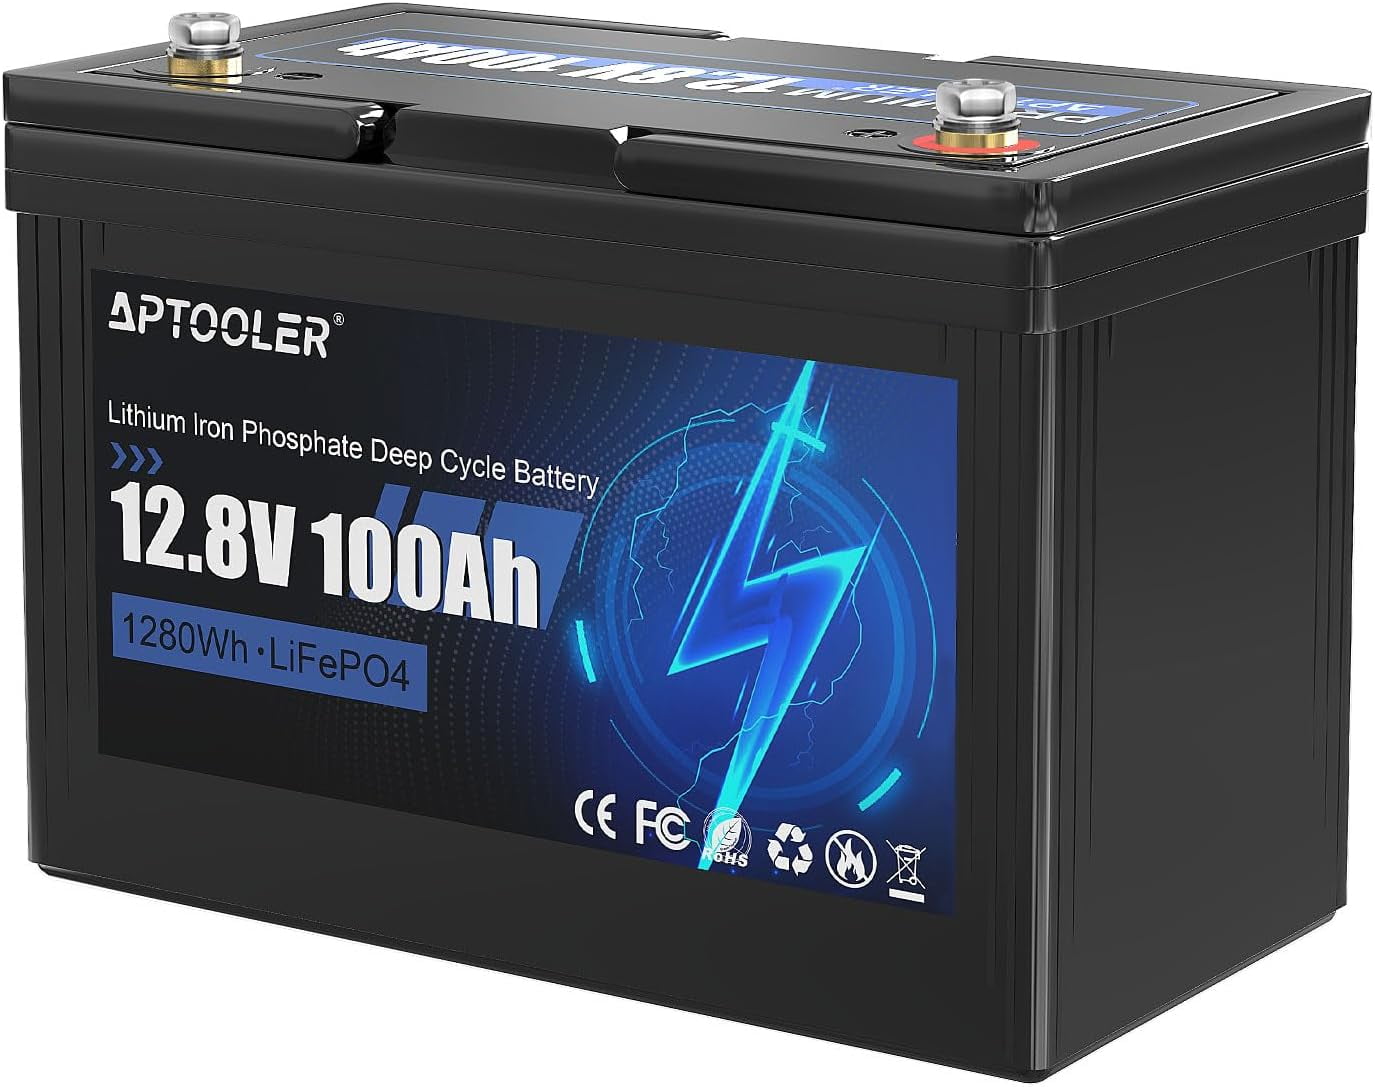 Vpment 12V 100Ah LiFePO4 Battery Built-in 100A BMS, 1280W Load Power, Up to  15000 Cyclese, Perfect for Solar Energy Storage, Backup Power, RV, Camping,  Off-Grid 